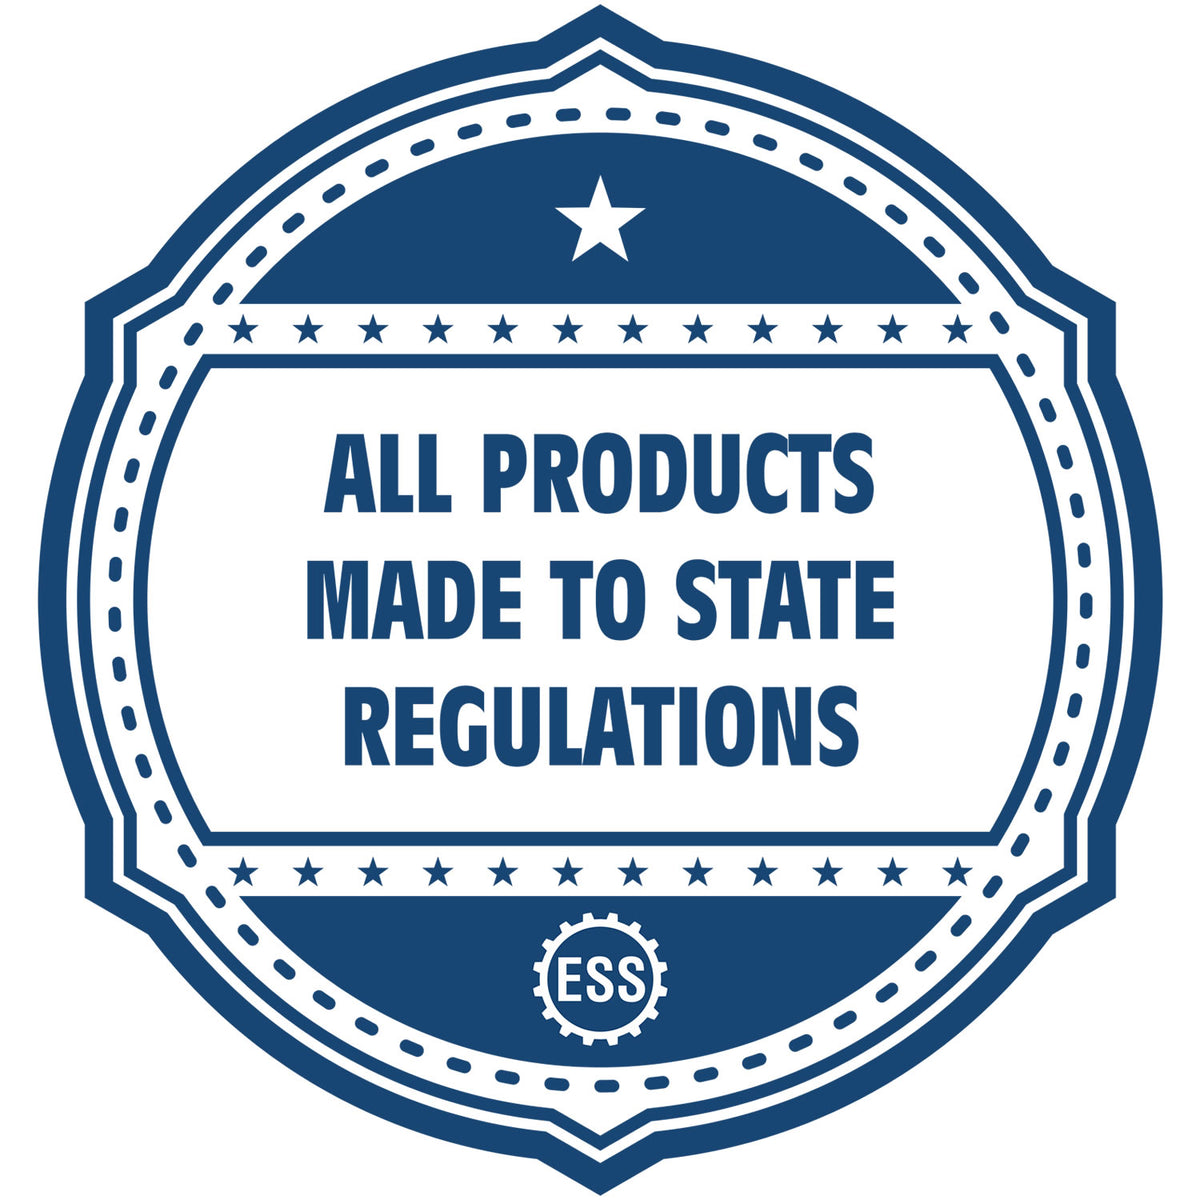 A blue icon or badge for the Gift Mississippi Architect Seal showing that this product is made in compliance with state regulations.